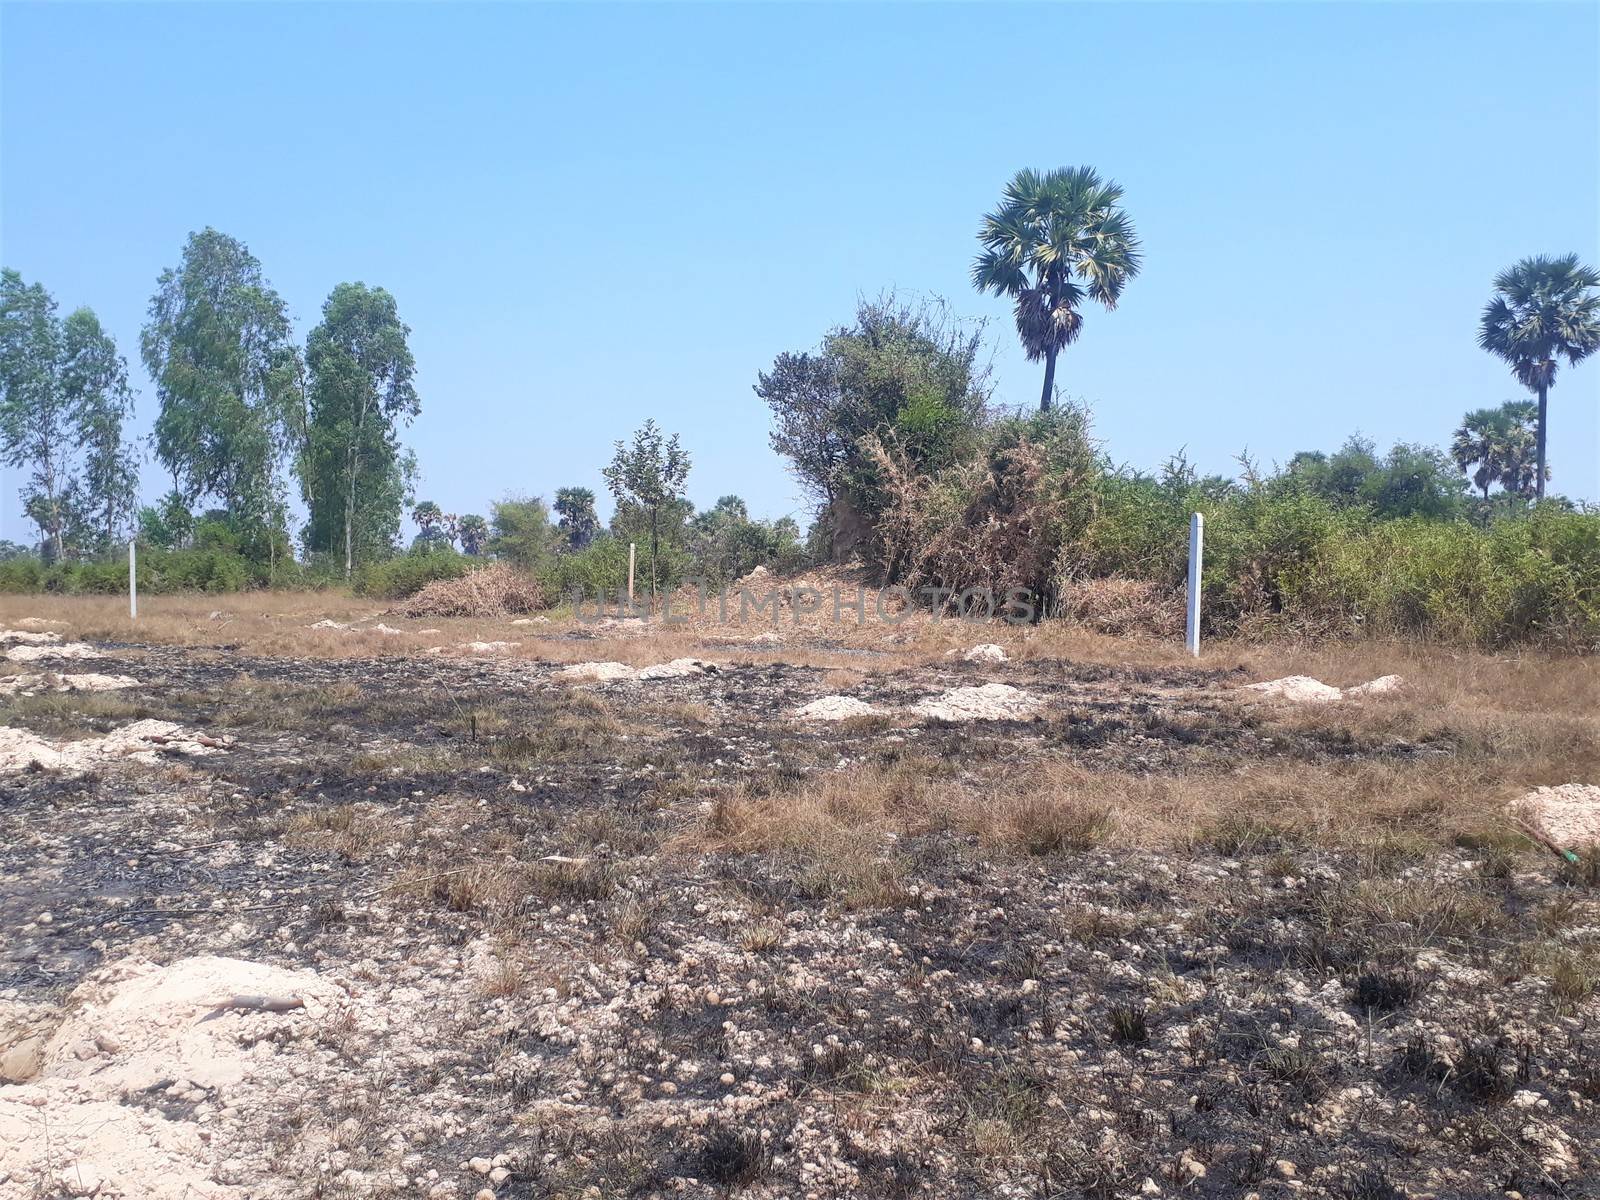 Cambodia rice paddy stubble burnt for next years crop. Dry season burning to clear land.